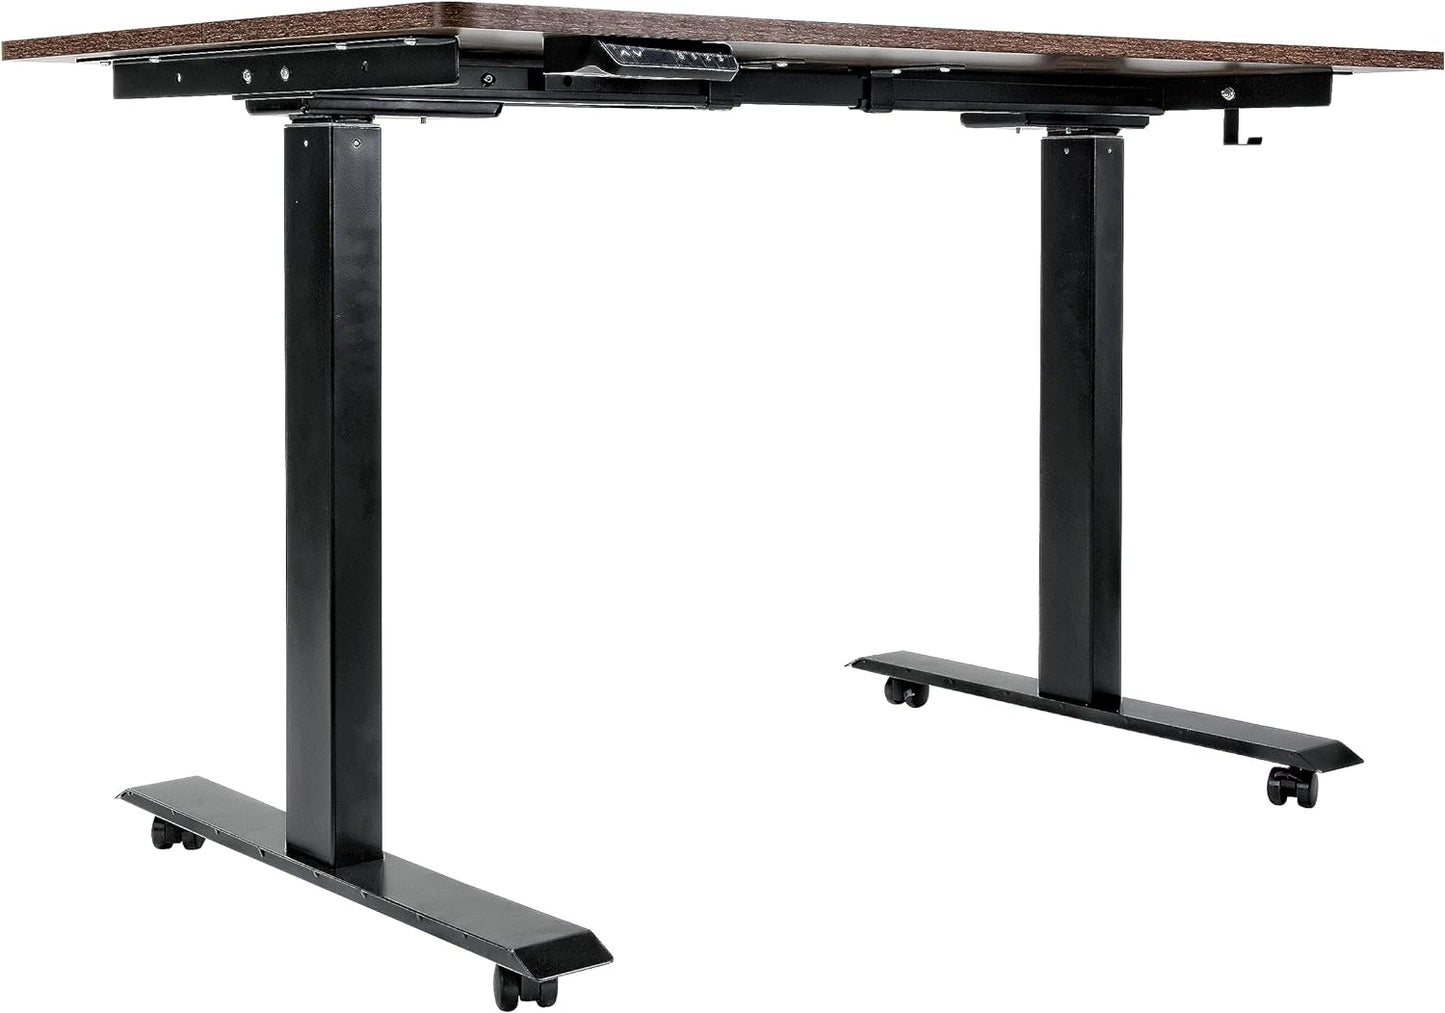 SuperHandy Standing Desk Adjustable Height (48'' x 30''), 3 Memory Presets - Large Electric Sit-Stand Adjustable Height up to 49'' - Rustic Wood